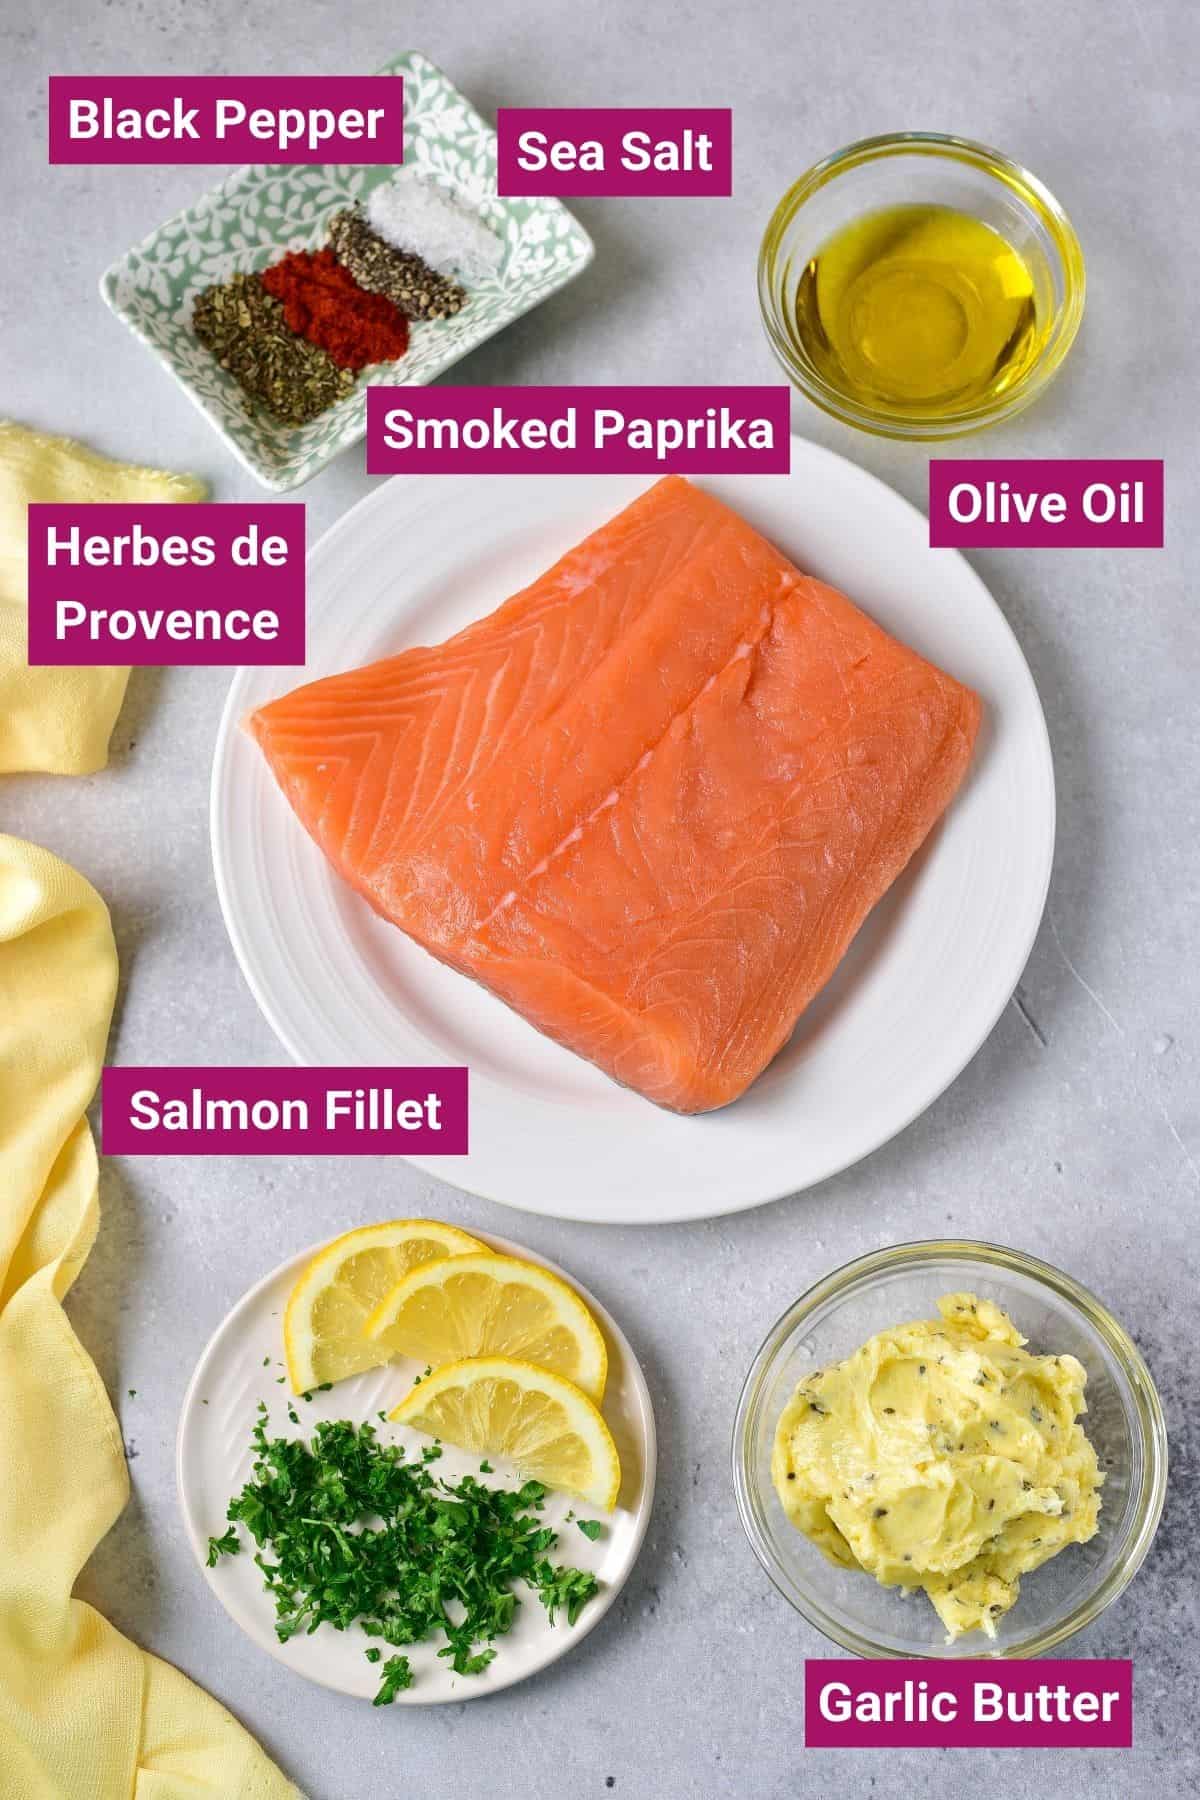 Overhead view of the labeled ingredients needed for air fryer salmon fillets: A plate with a salmon filed, a ramekin of olive oil, a dish of sea salt, black pepper, smoked paprika, and Herbes de Provence, a ramekin of garlic butter, and a plate of lemon slices and chopped parsley